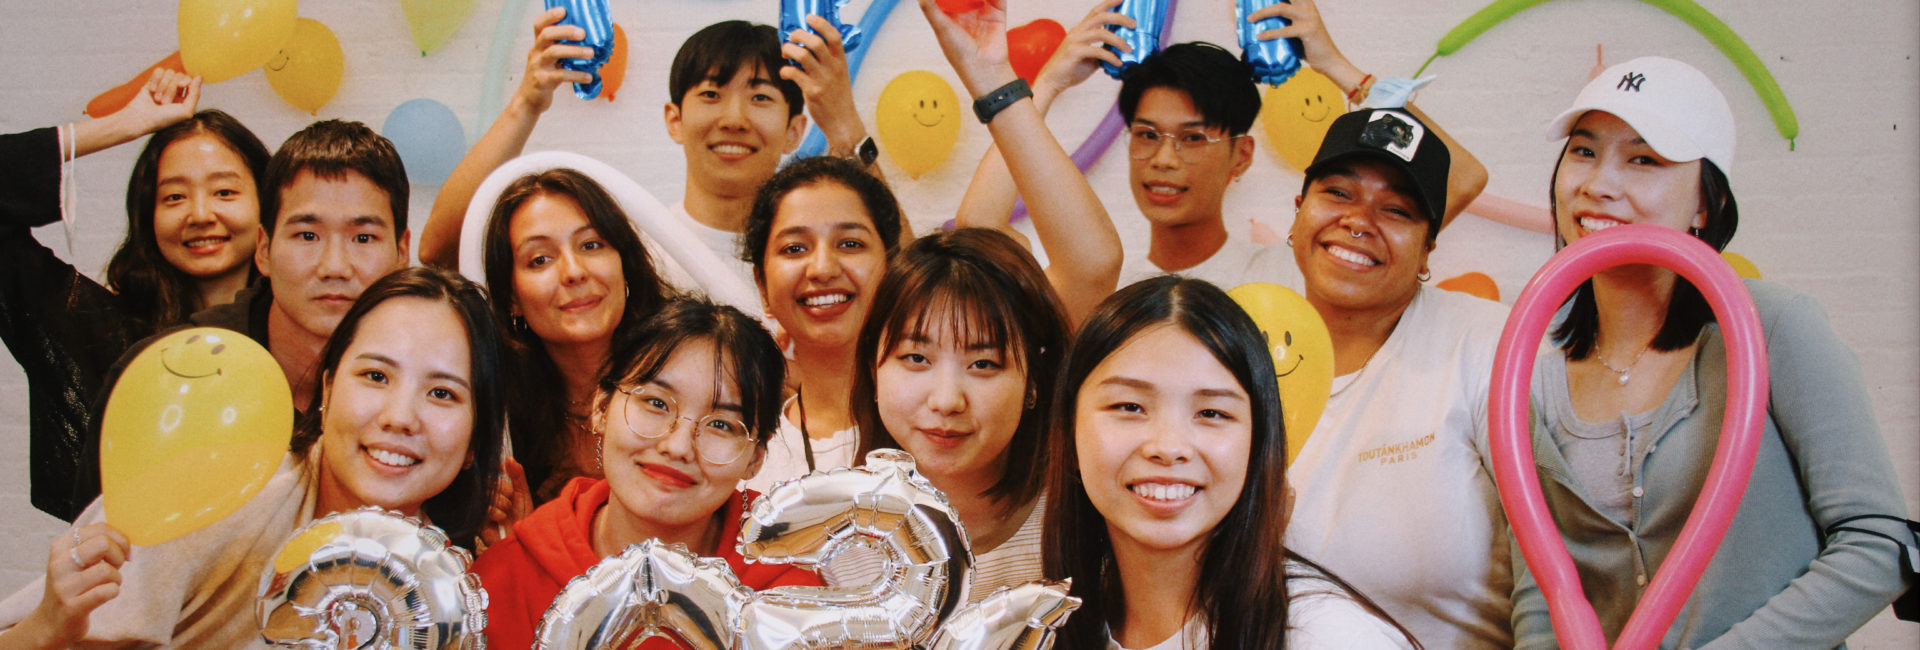 group of students holding balloons in front of colorful wall